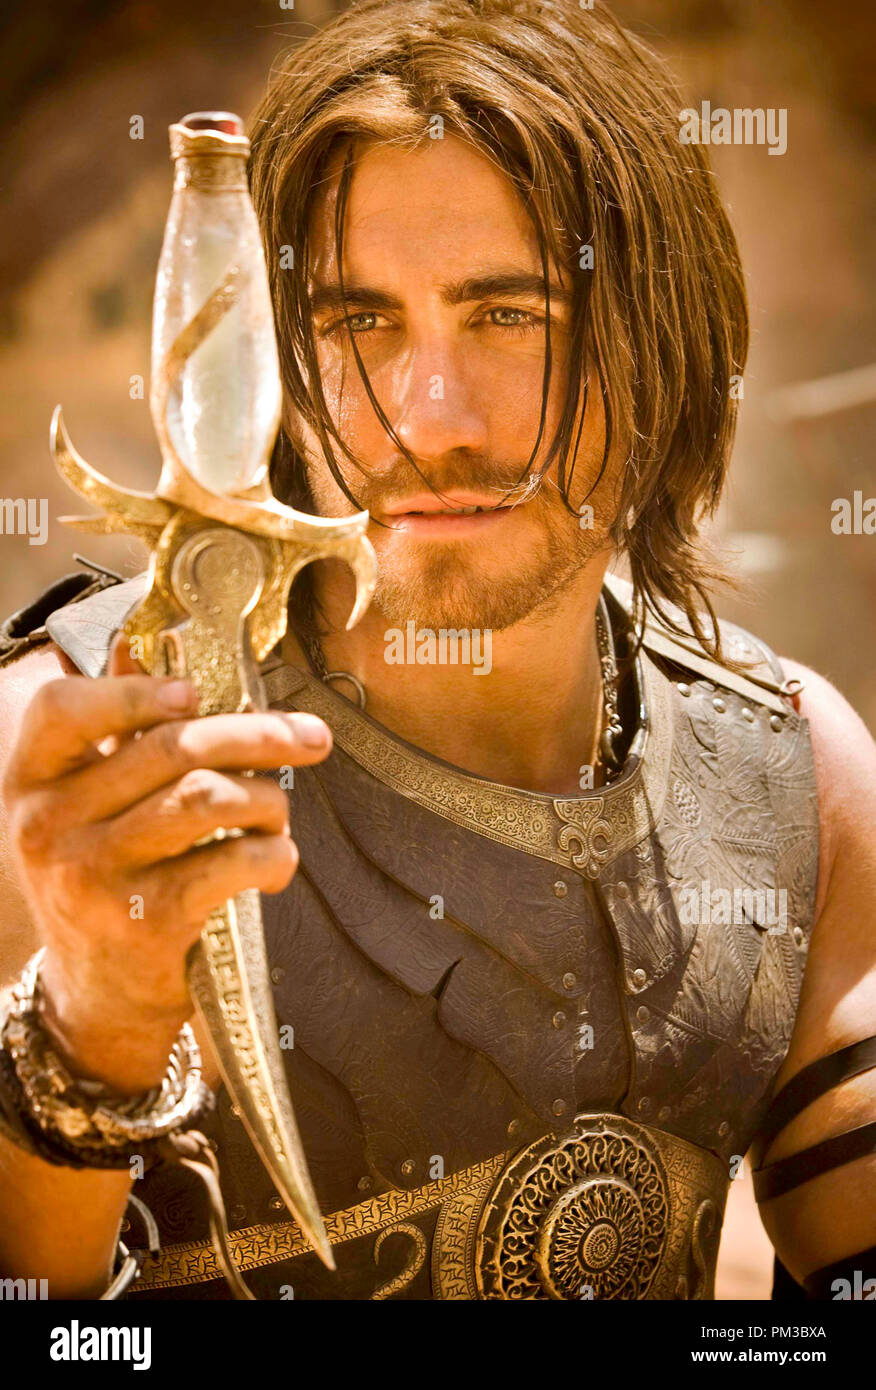  Prince of Persia: The Sands of Time : Jake Gyllenhaal